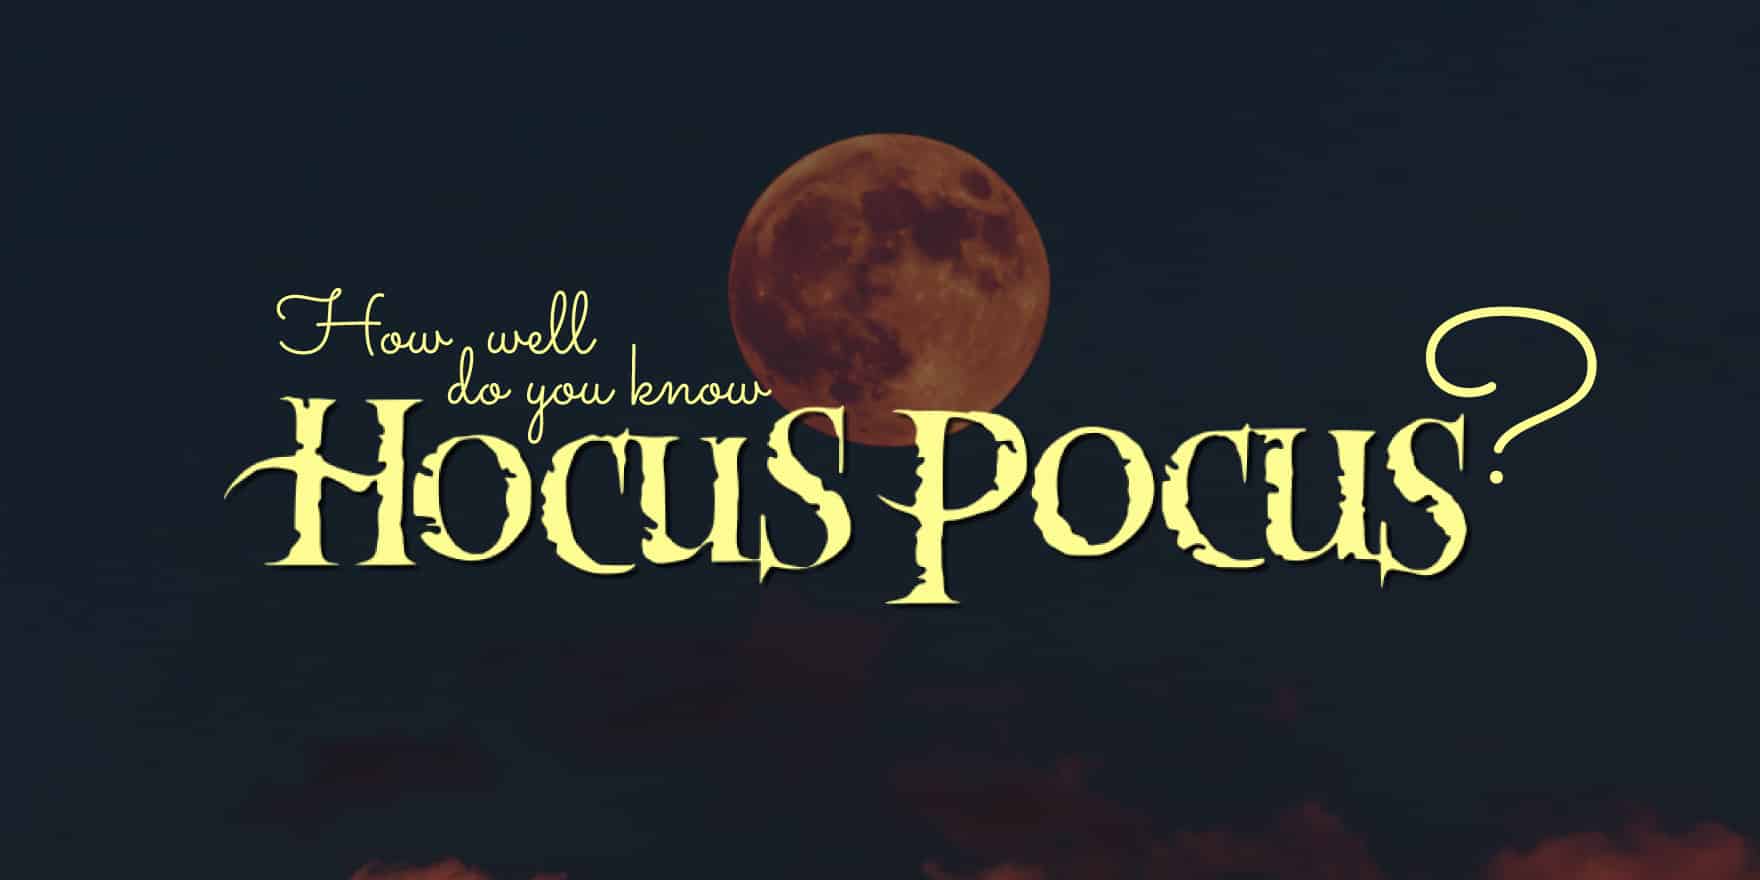 How Well Do You Know Halloween Classic: Hocus Pocus?